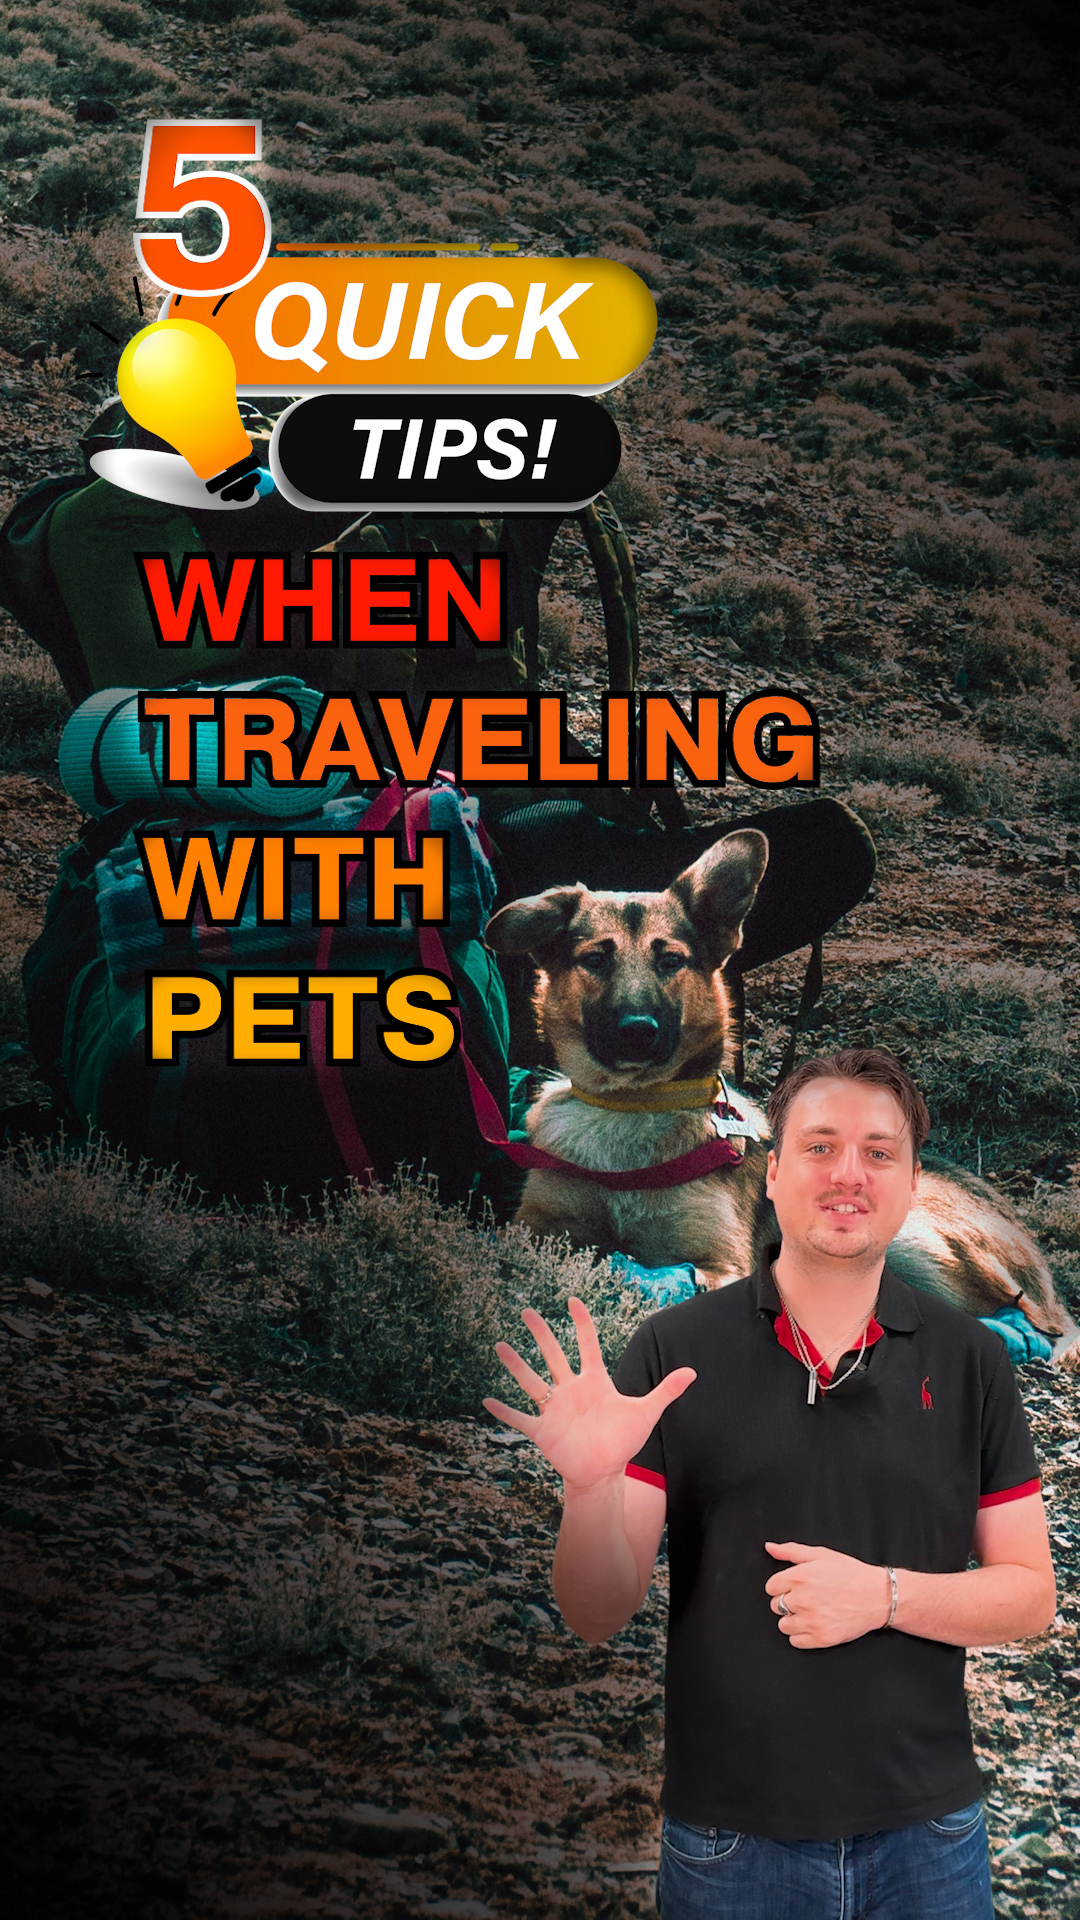 Orlando Rent A Villas video: 5 Quick tips when traveling with pets